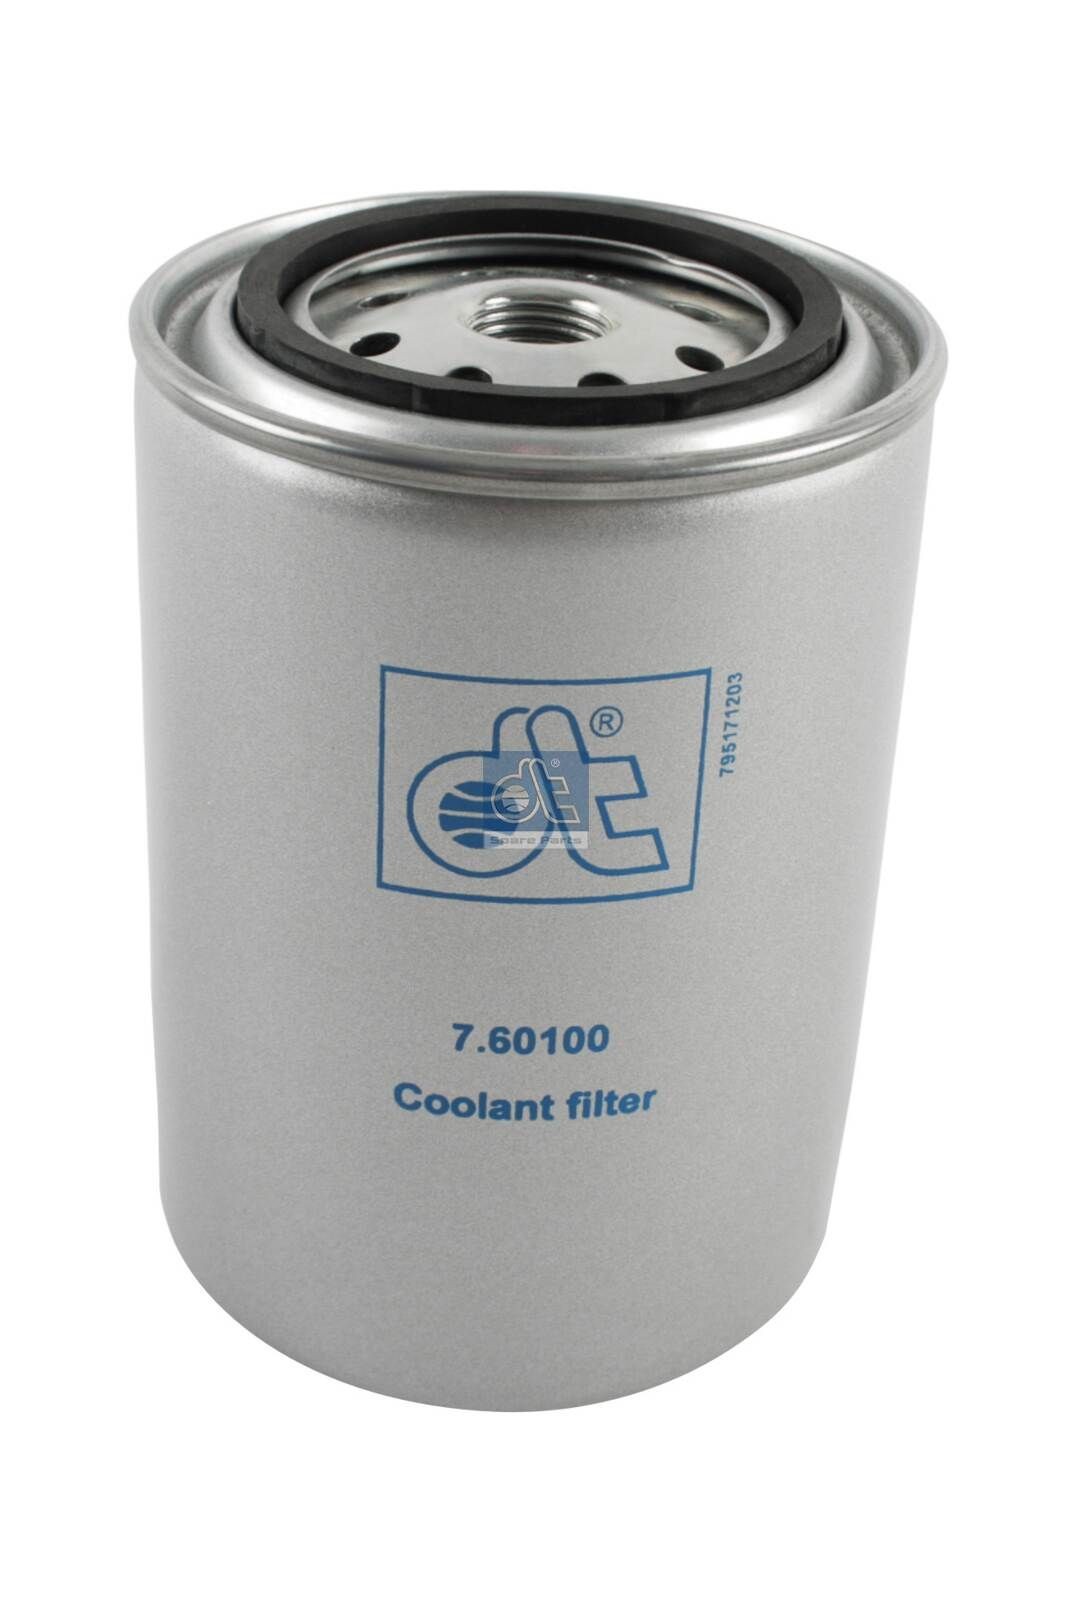 WA 940/6 DT Spare Parts 7.60100 Coolant Filter 9N-3717